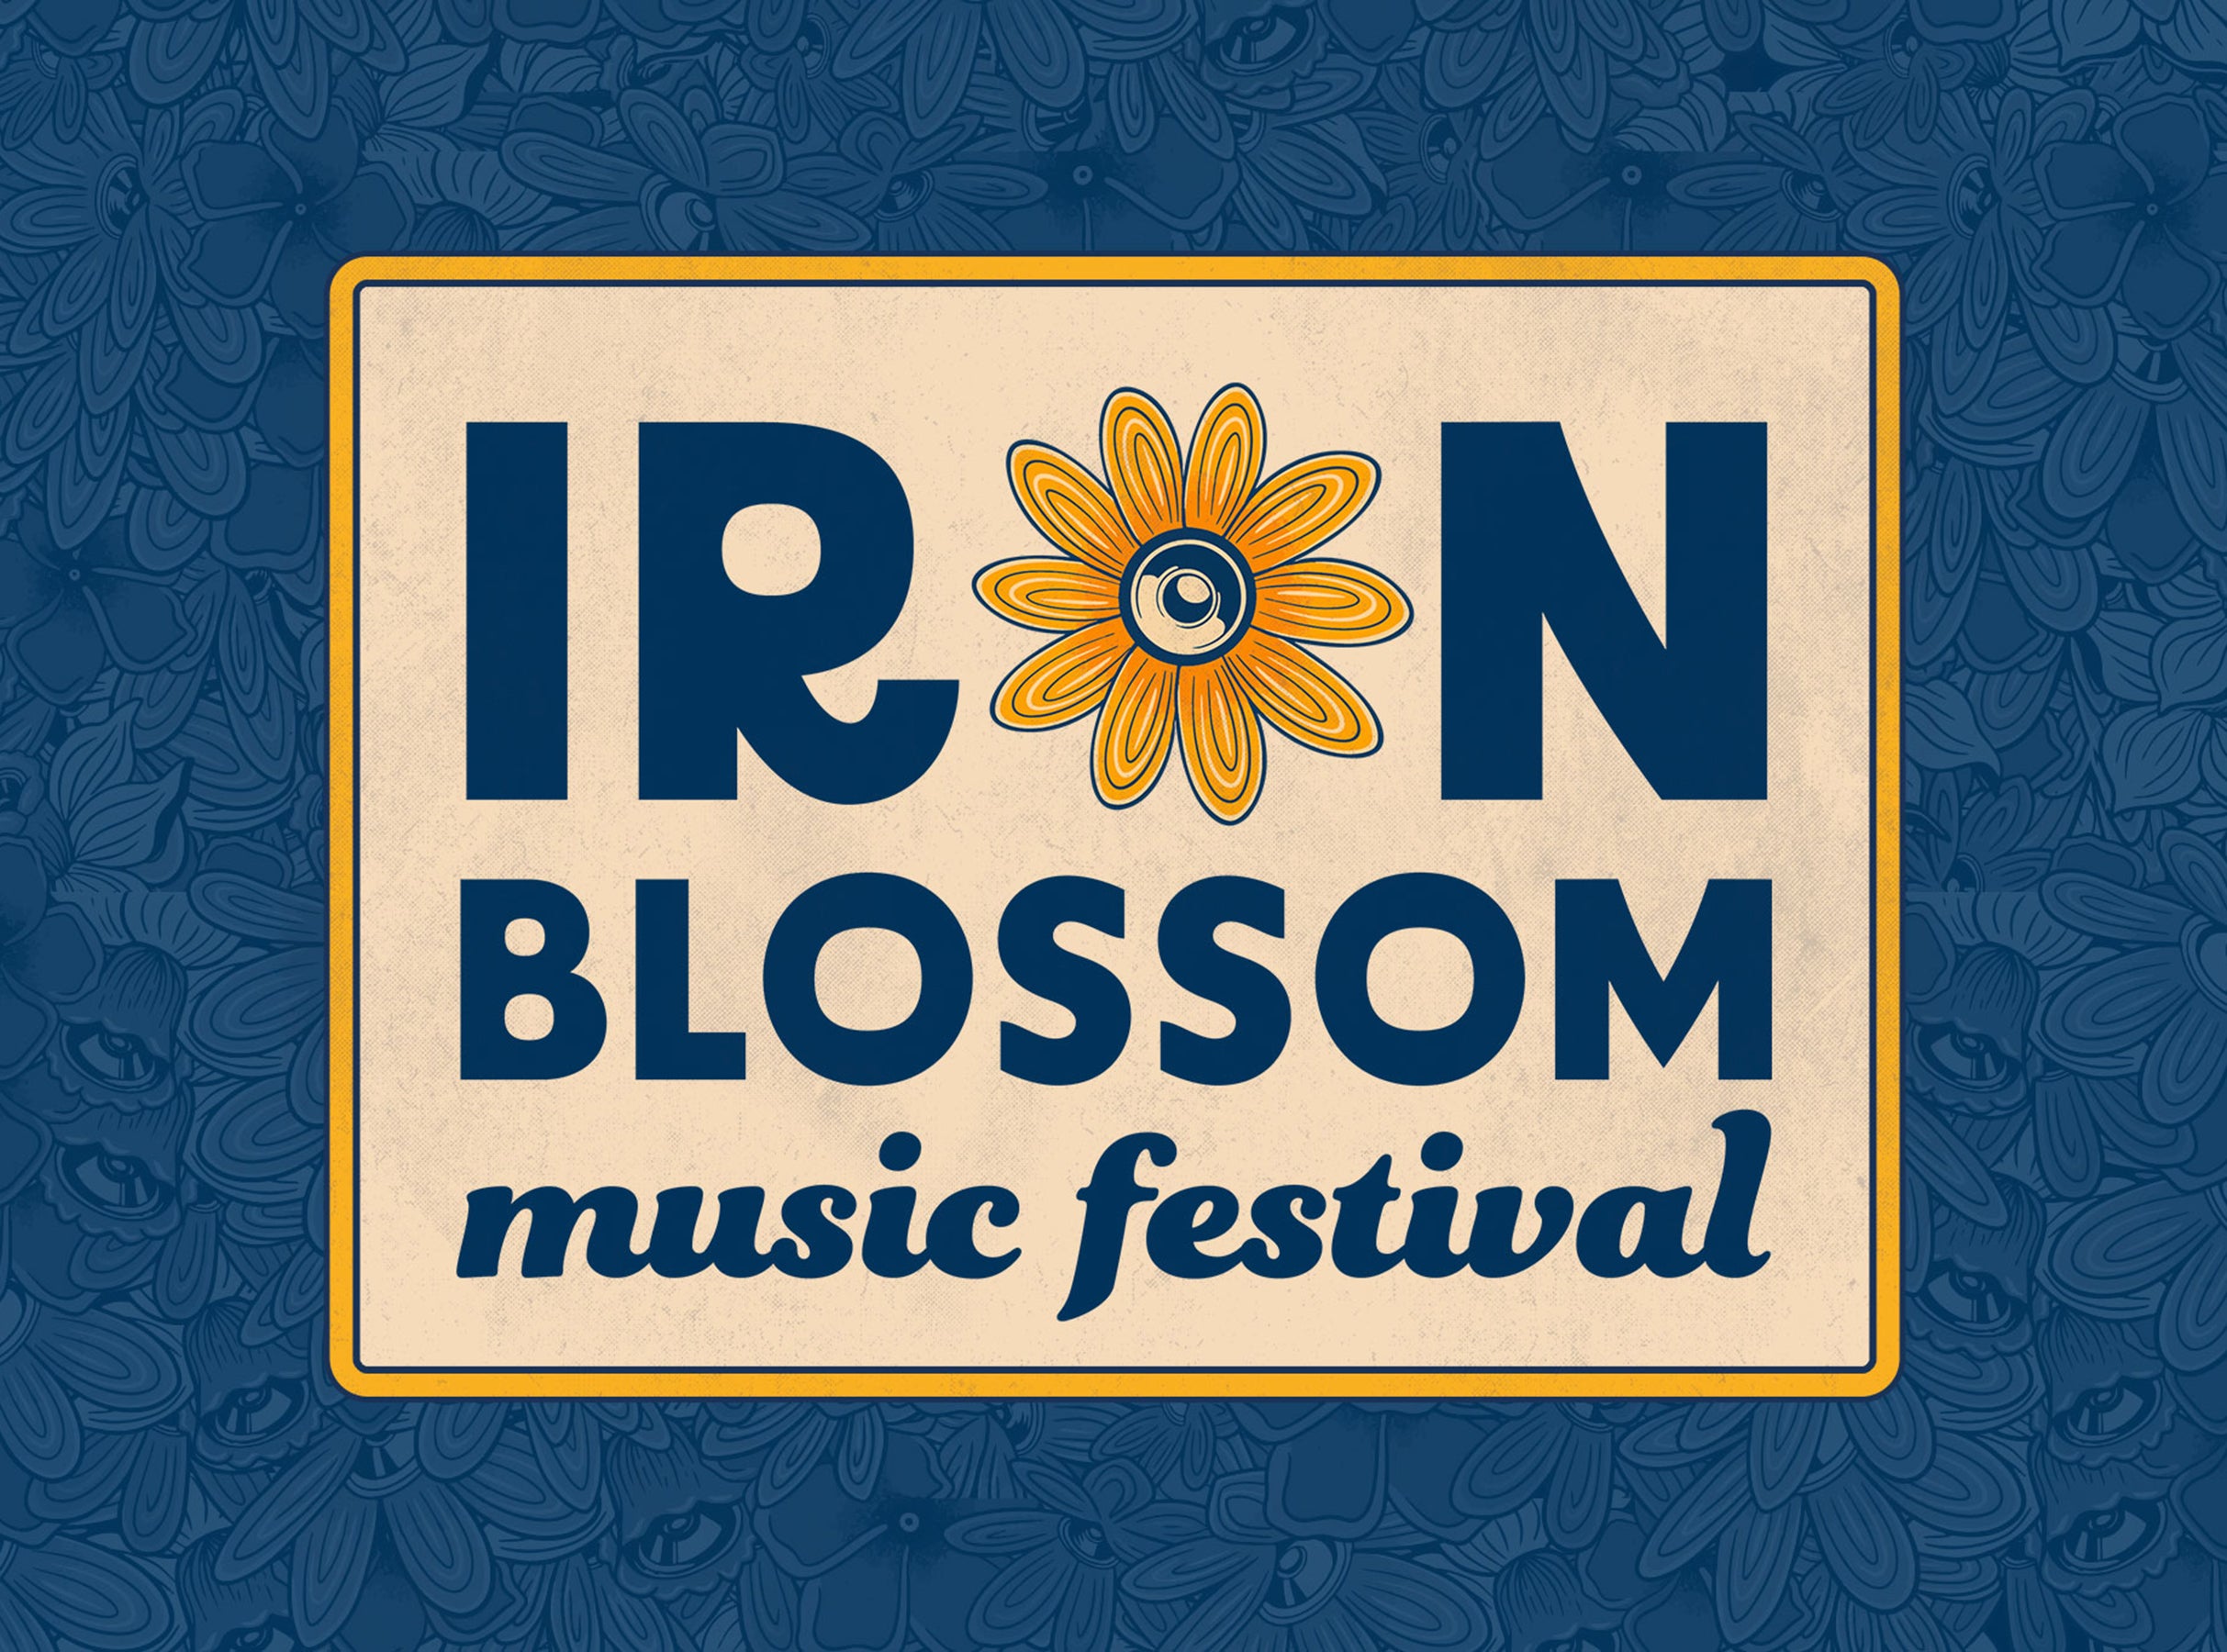 Iron Blossom Festival at The Training Center on Leigh